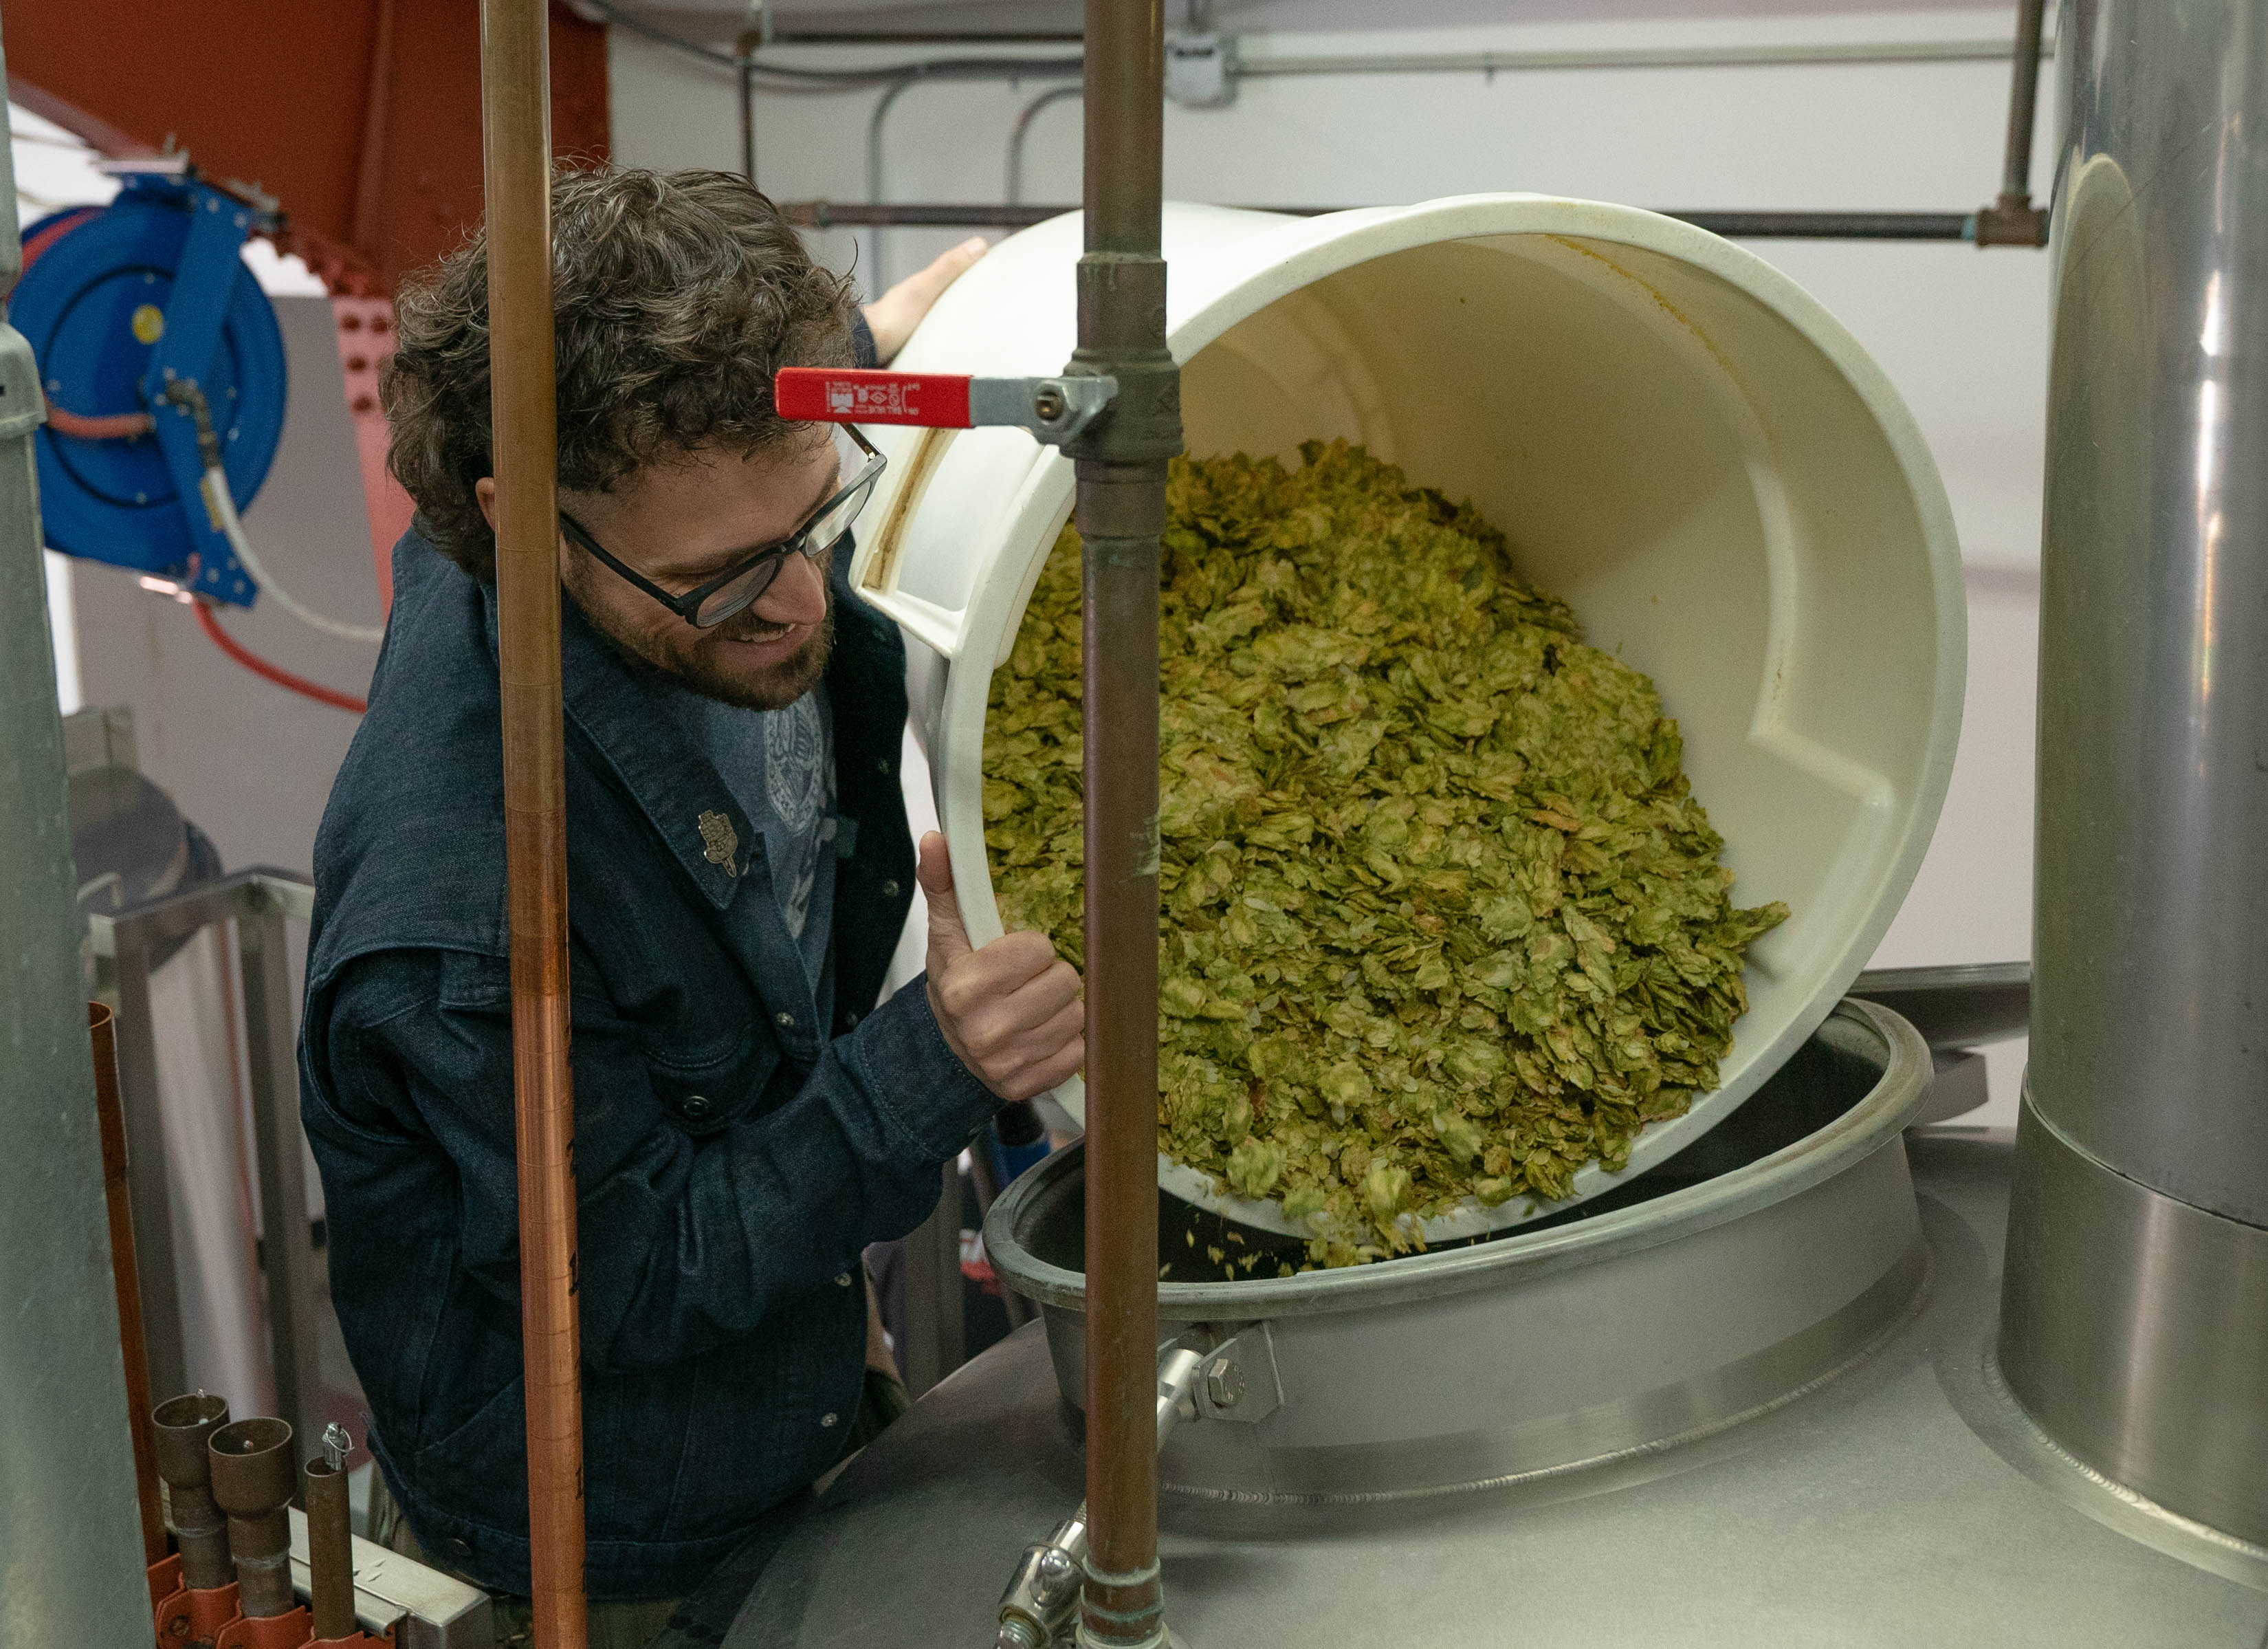 The Unipiper adding hops during brew day at Gigantic Brewing. (image courtesy of Gigantic Brewing)